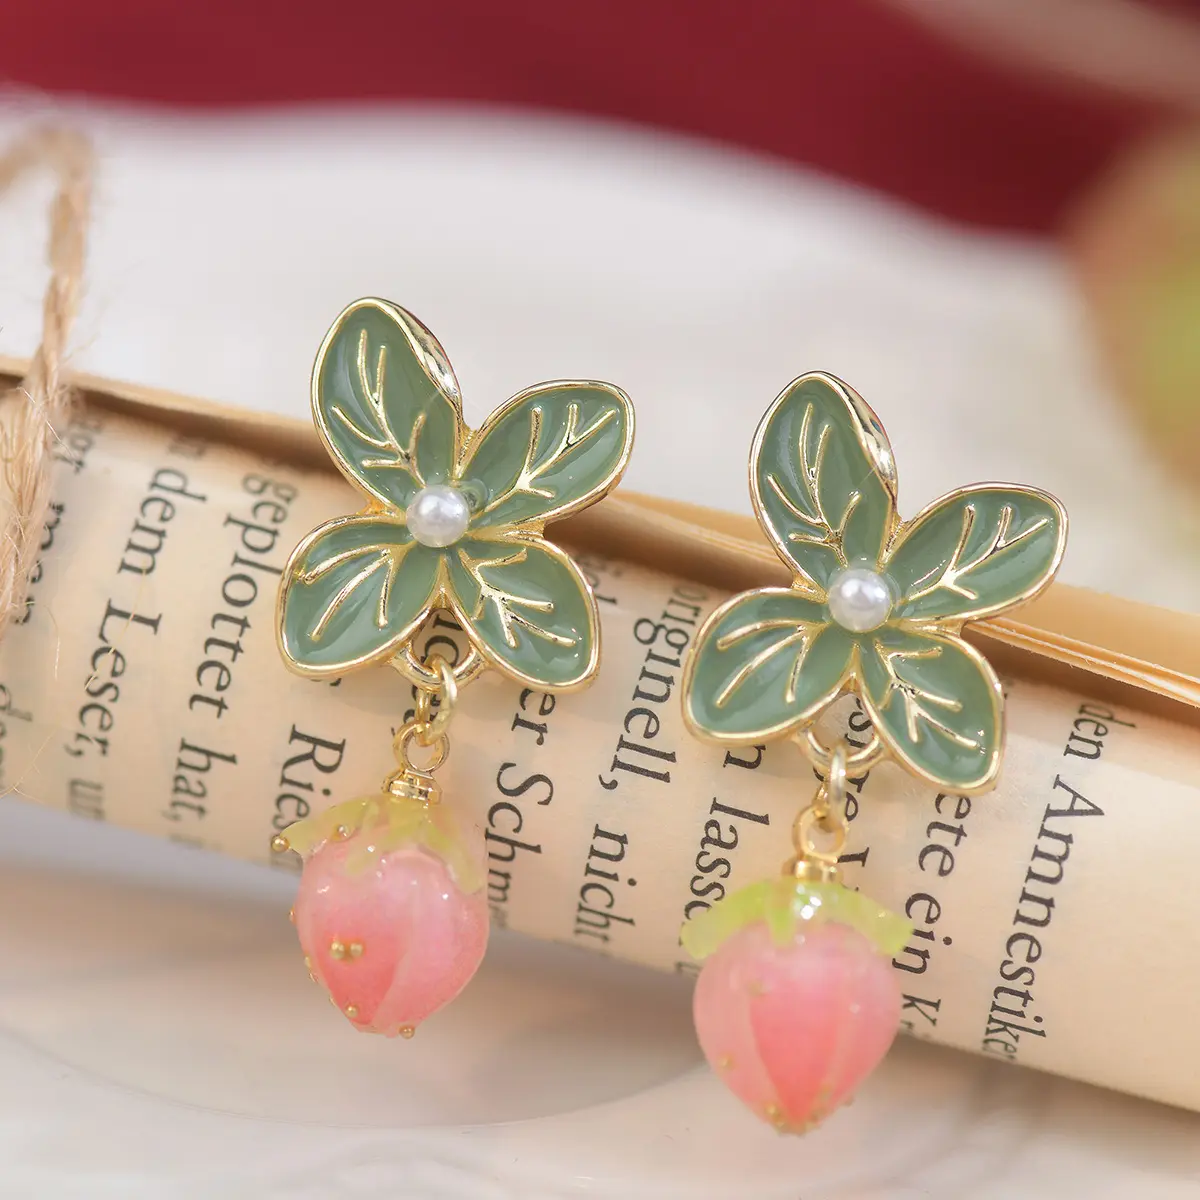 Fresh and Sweet Strawberry Smoothie Earrings with Leaf Design